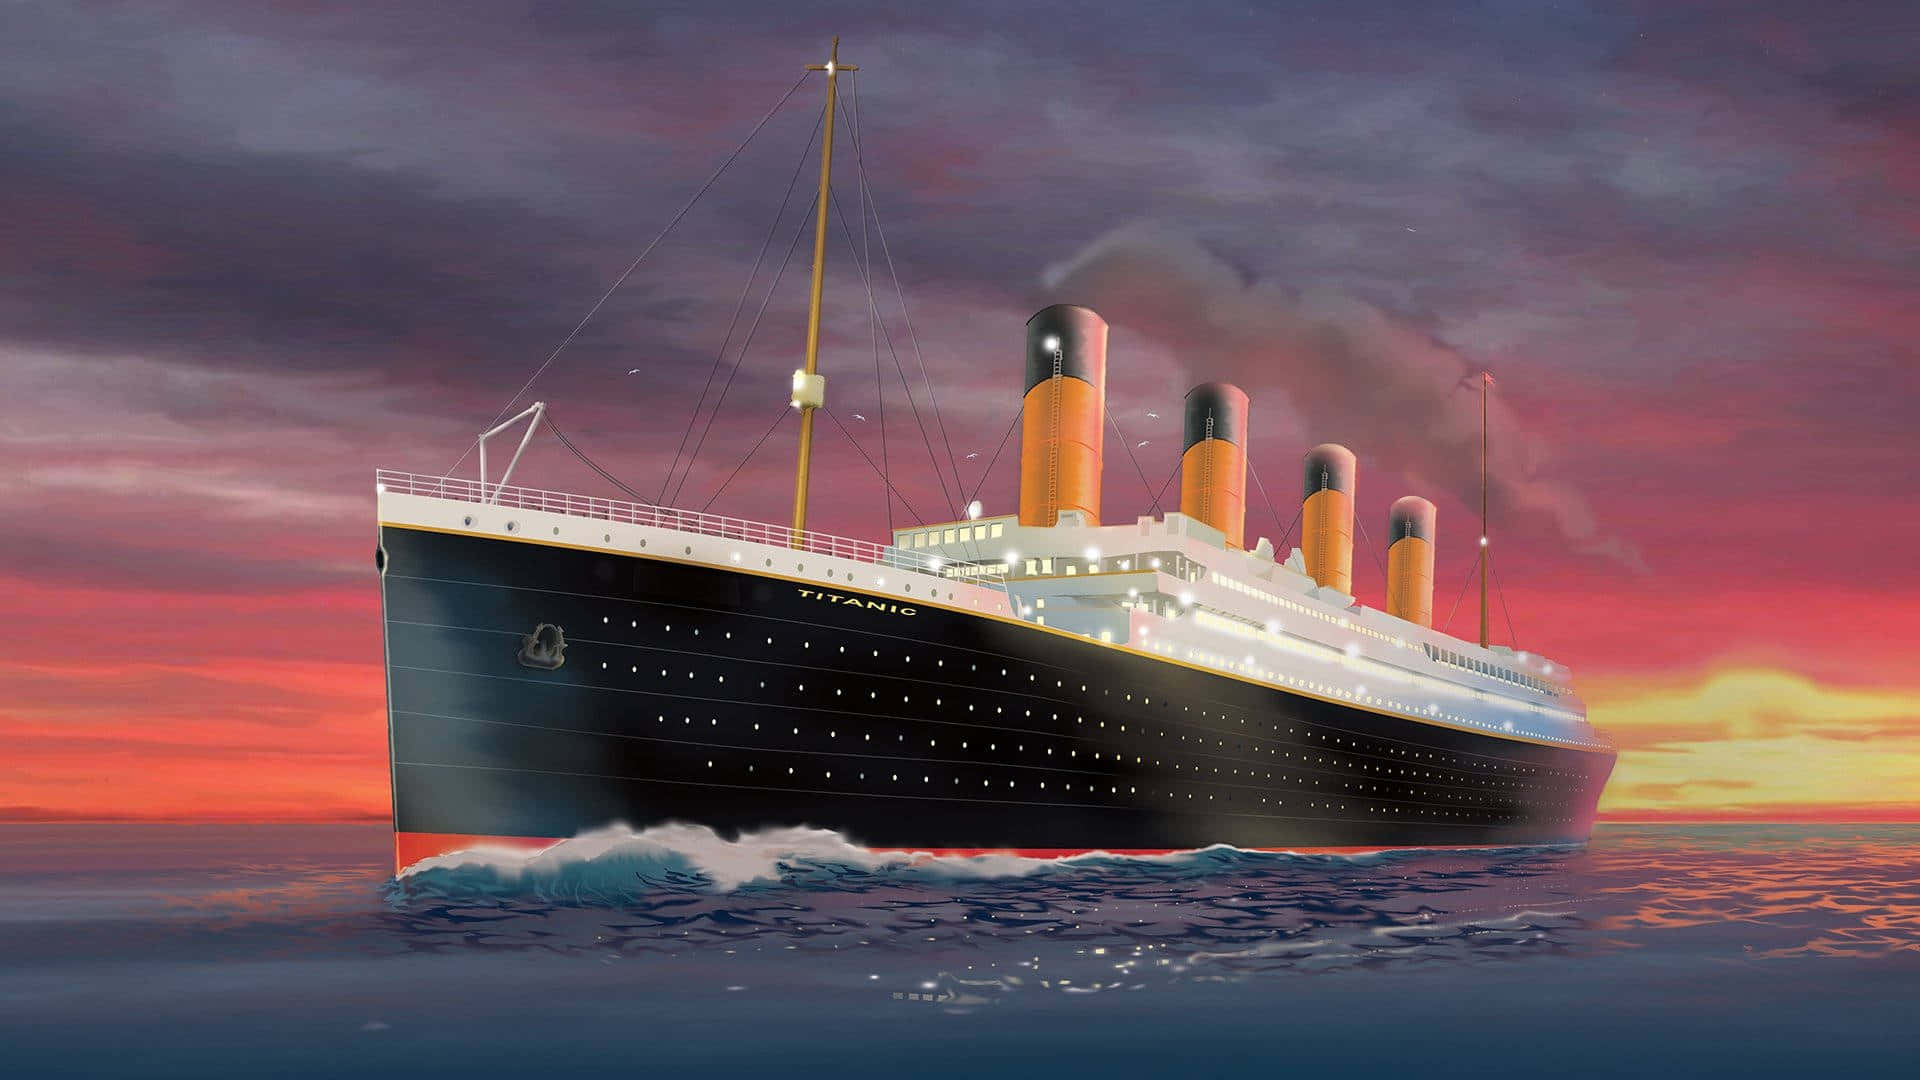 Titanic - The Greatest Ship In The World